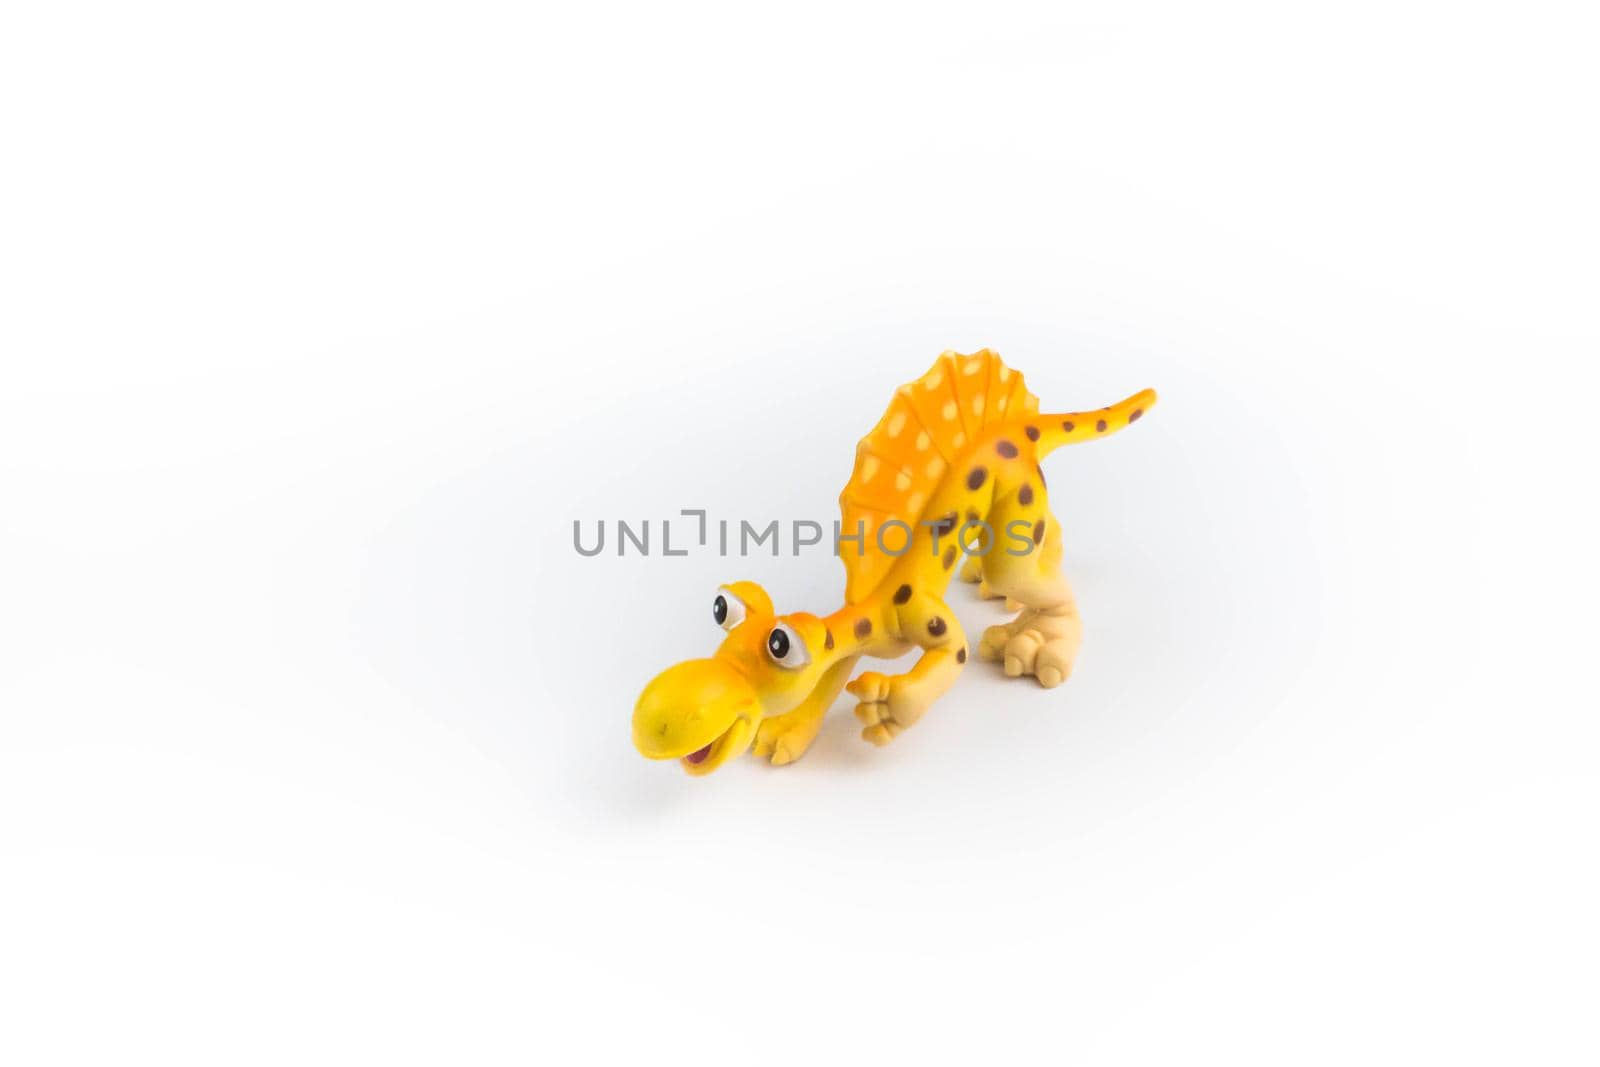 A beautiful funny dinosaur plastic toy isolated on white background by JuliaDorian